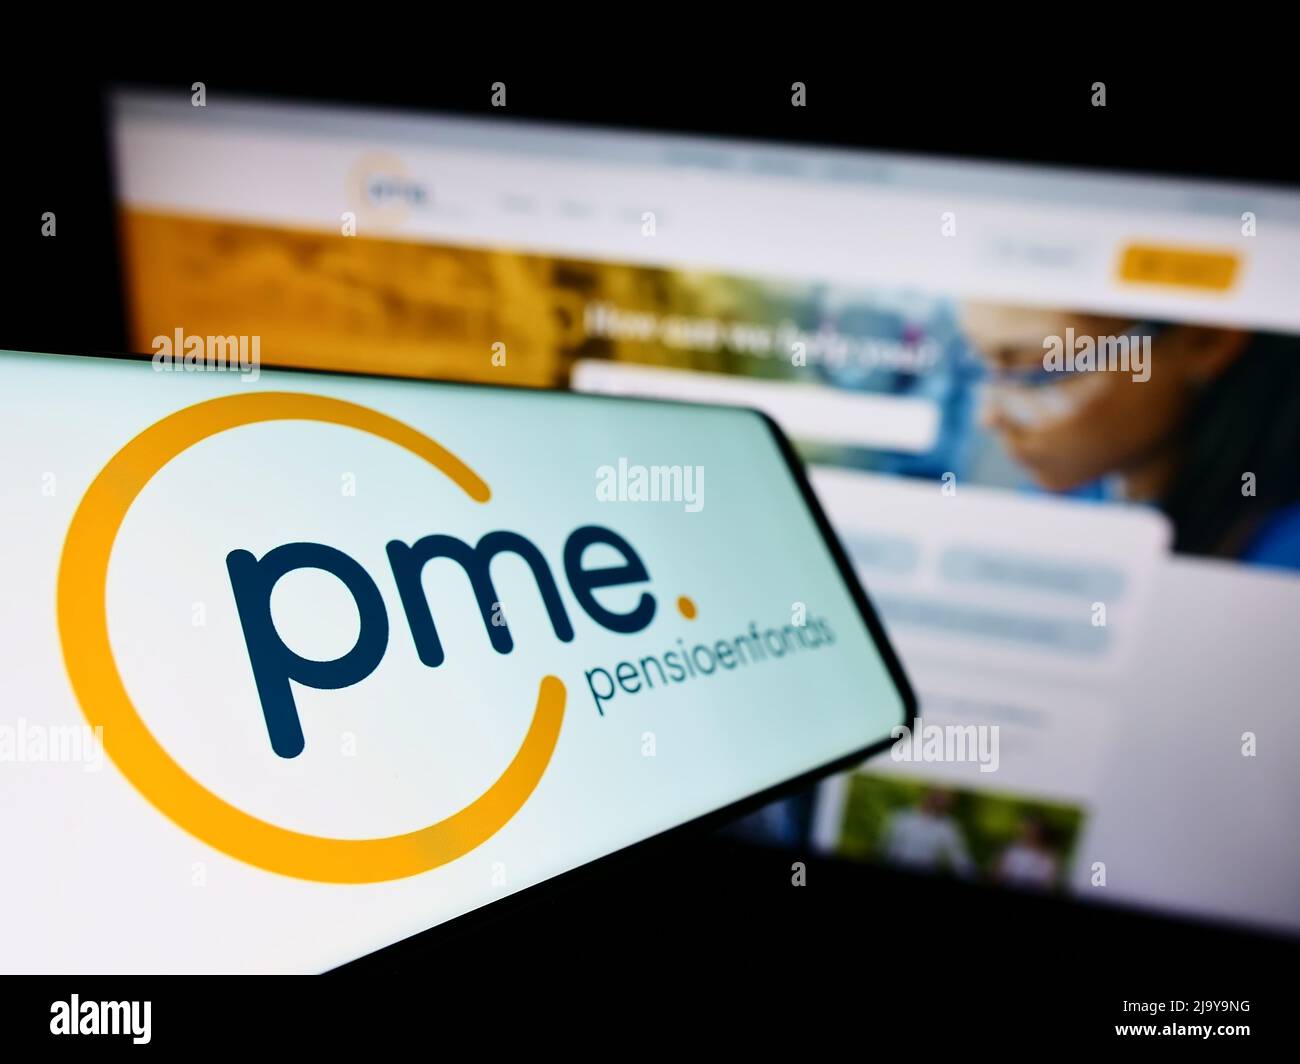 Smartphone with logo of Dutch pension fund PME Pensioenfonds on screen in front of business website. Focus on left of phone display. Stock Photo